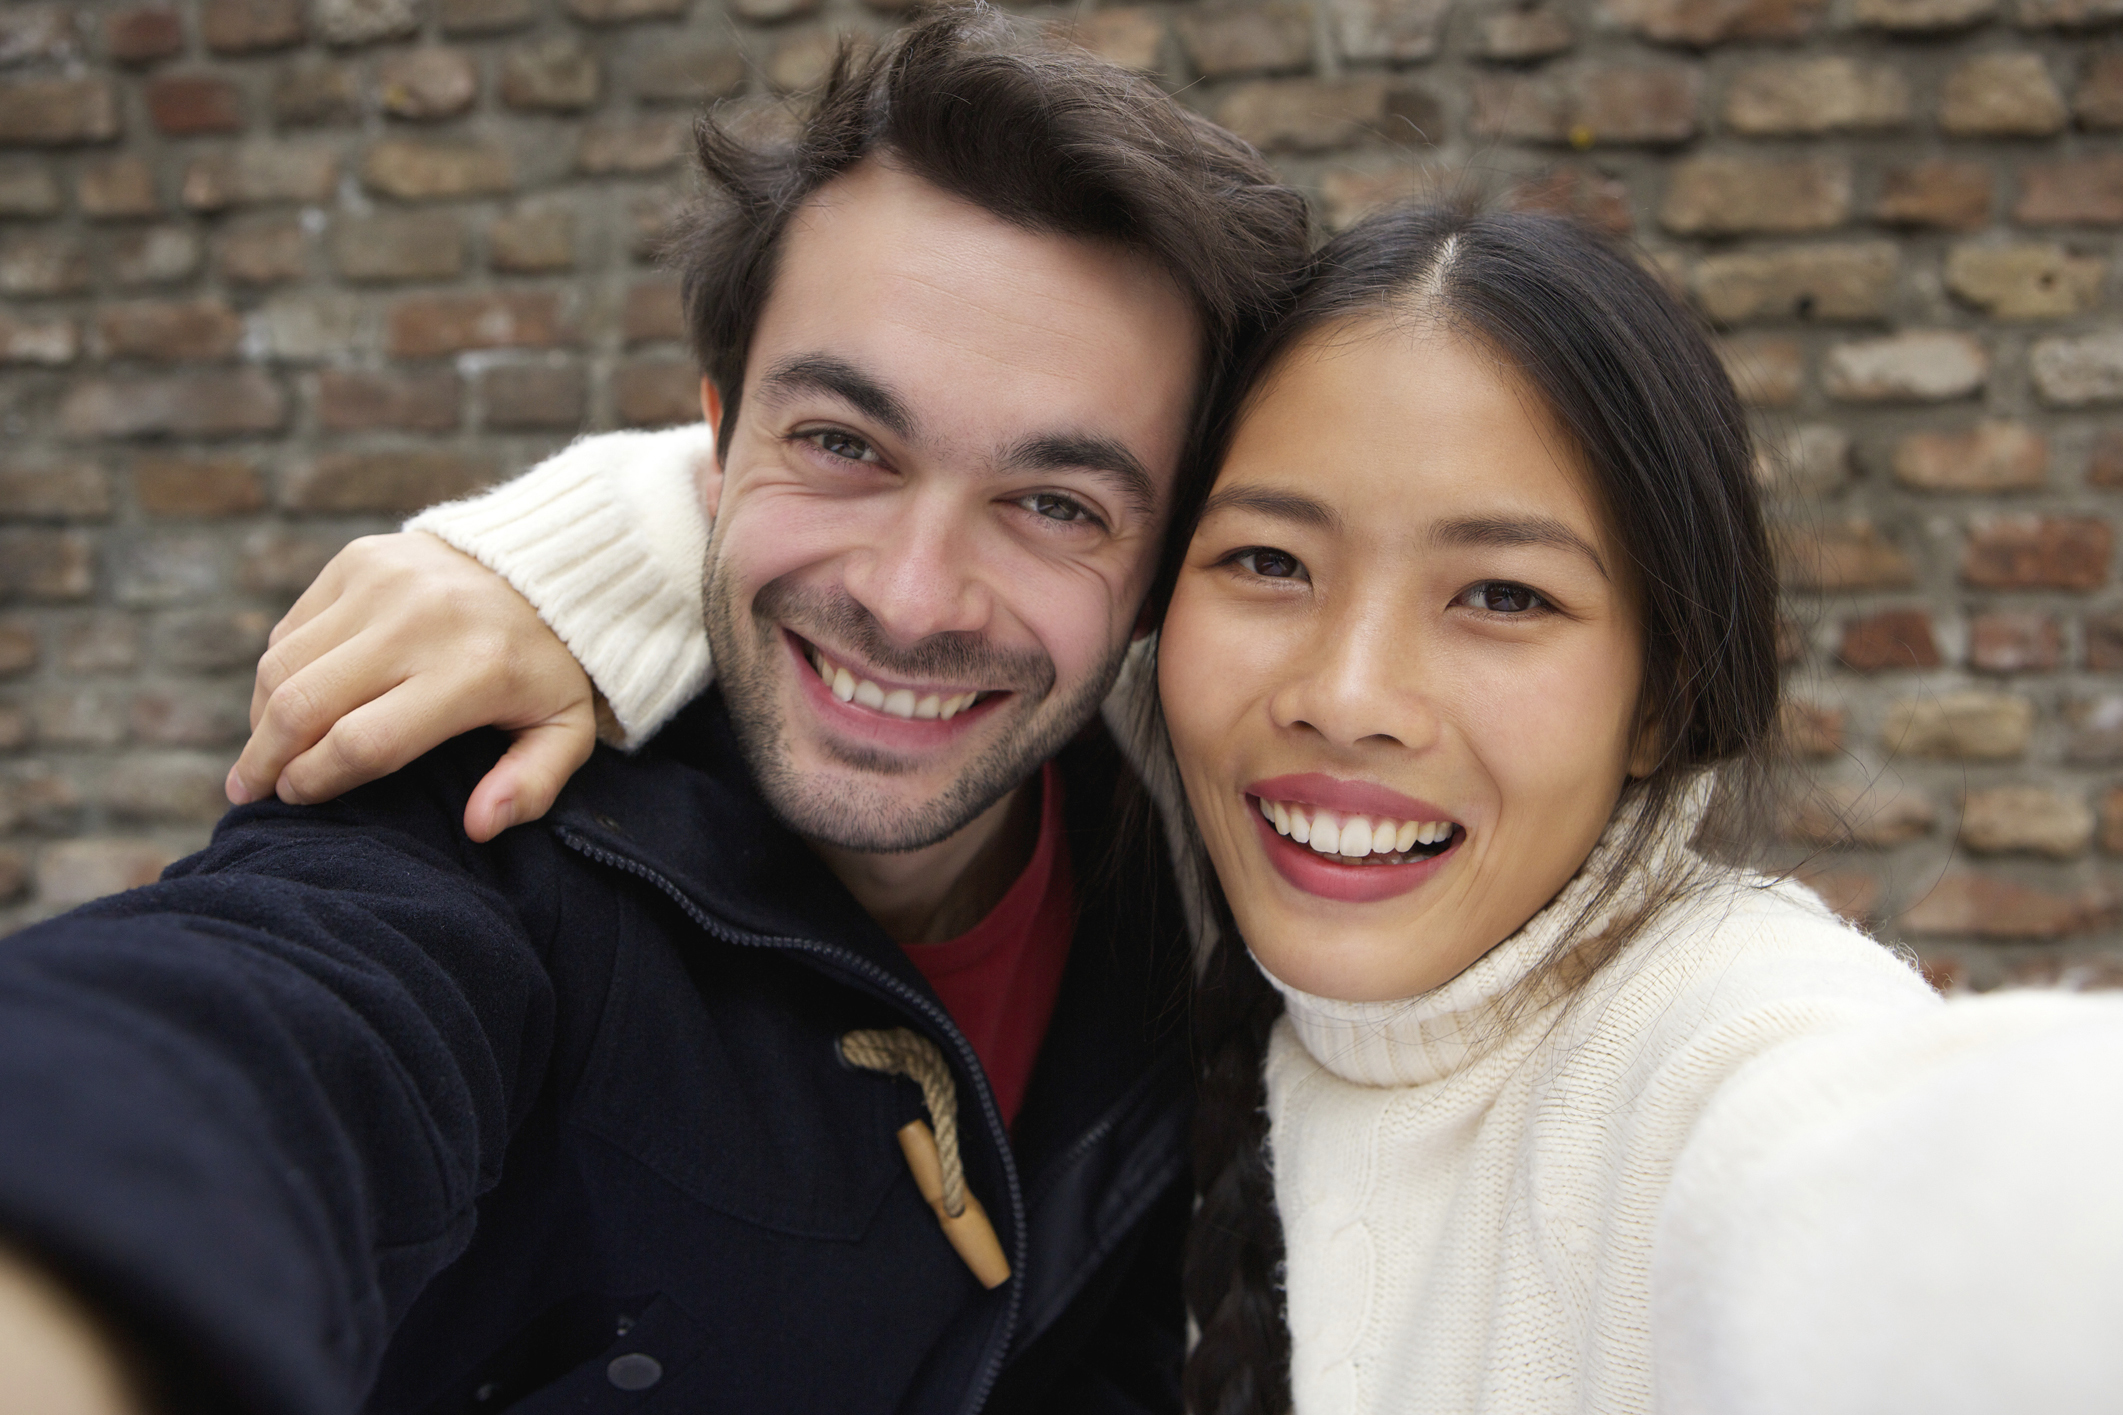 Dating in different cultures articles